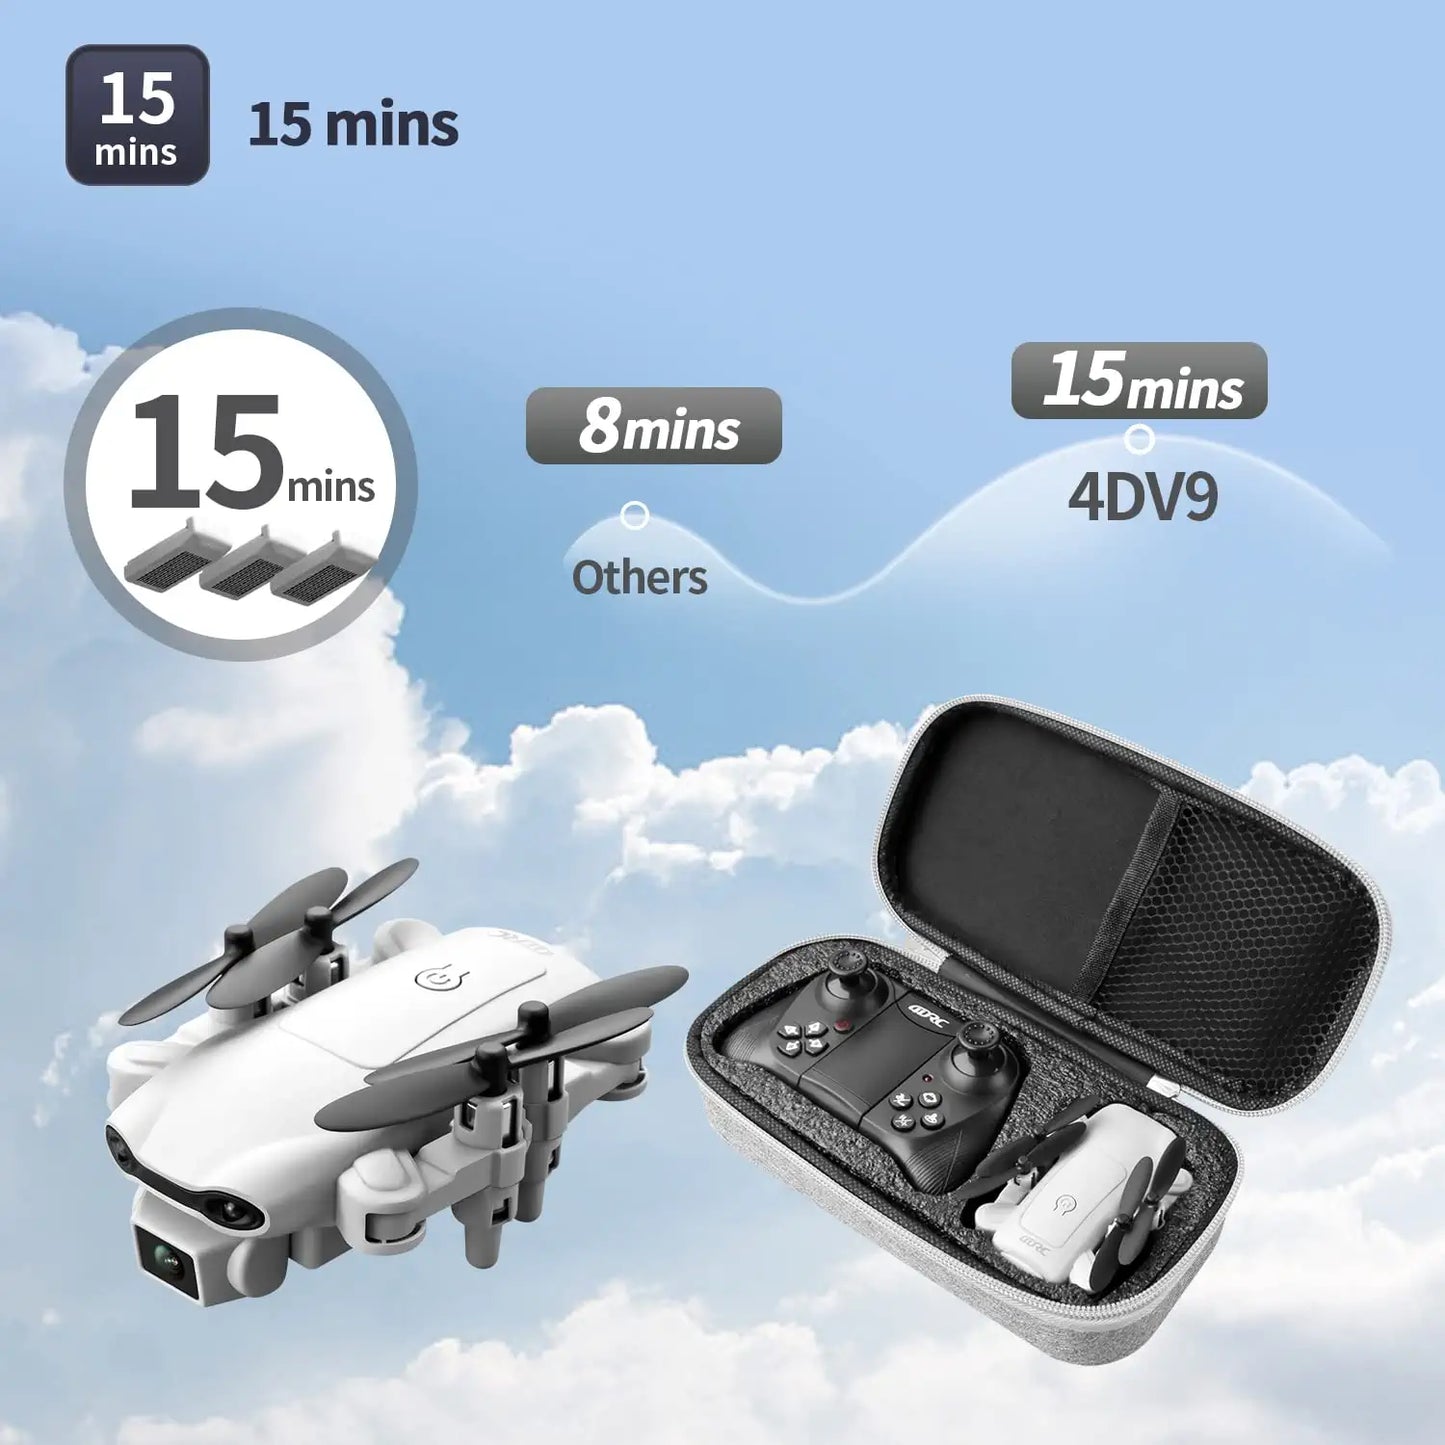 DroneEye 4DV9 Mini Drone - for Kids with 720P HD Camera FPV Live Video RC Quadcopter Helicopter for Adults beginners Toys Gifts,Altitude Hold, Waypoints Functions,One Key Start,3D Flips - RCDrone